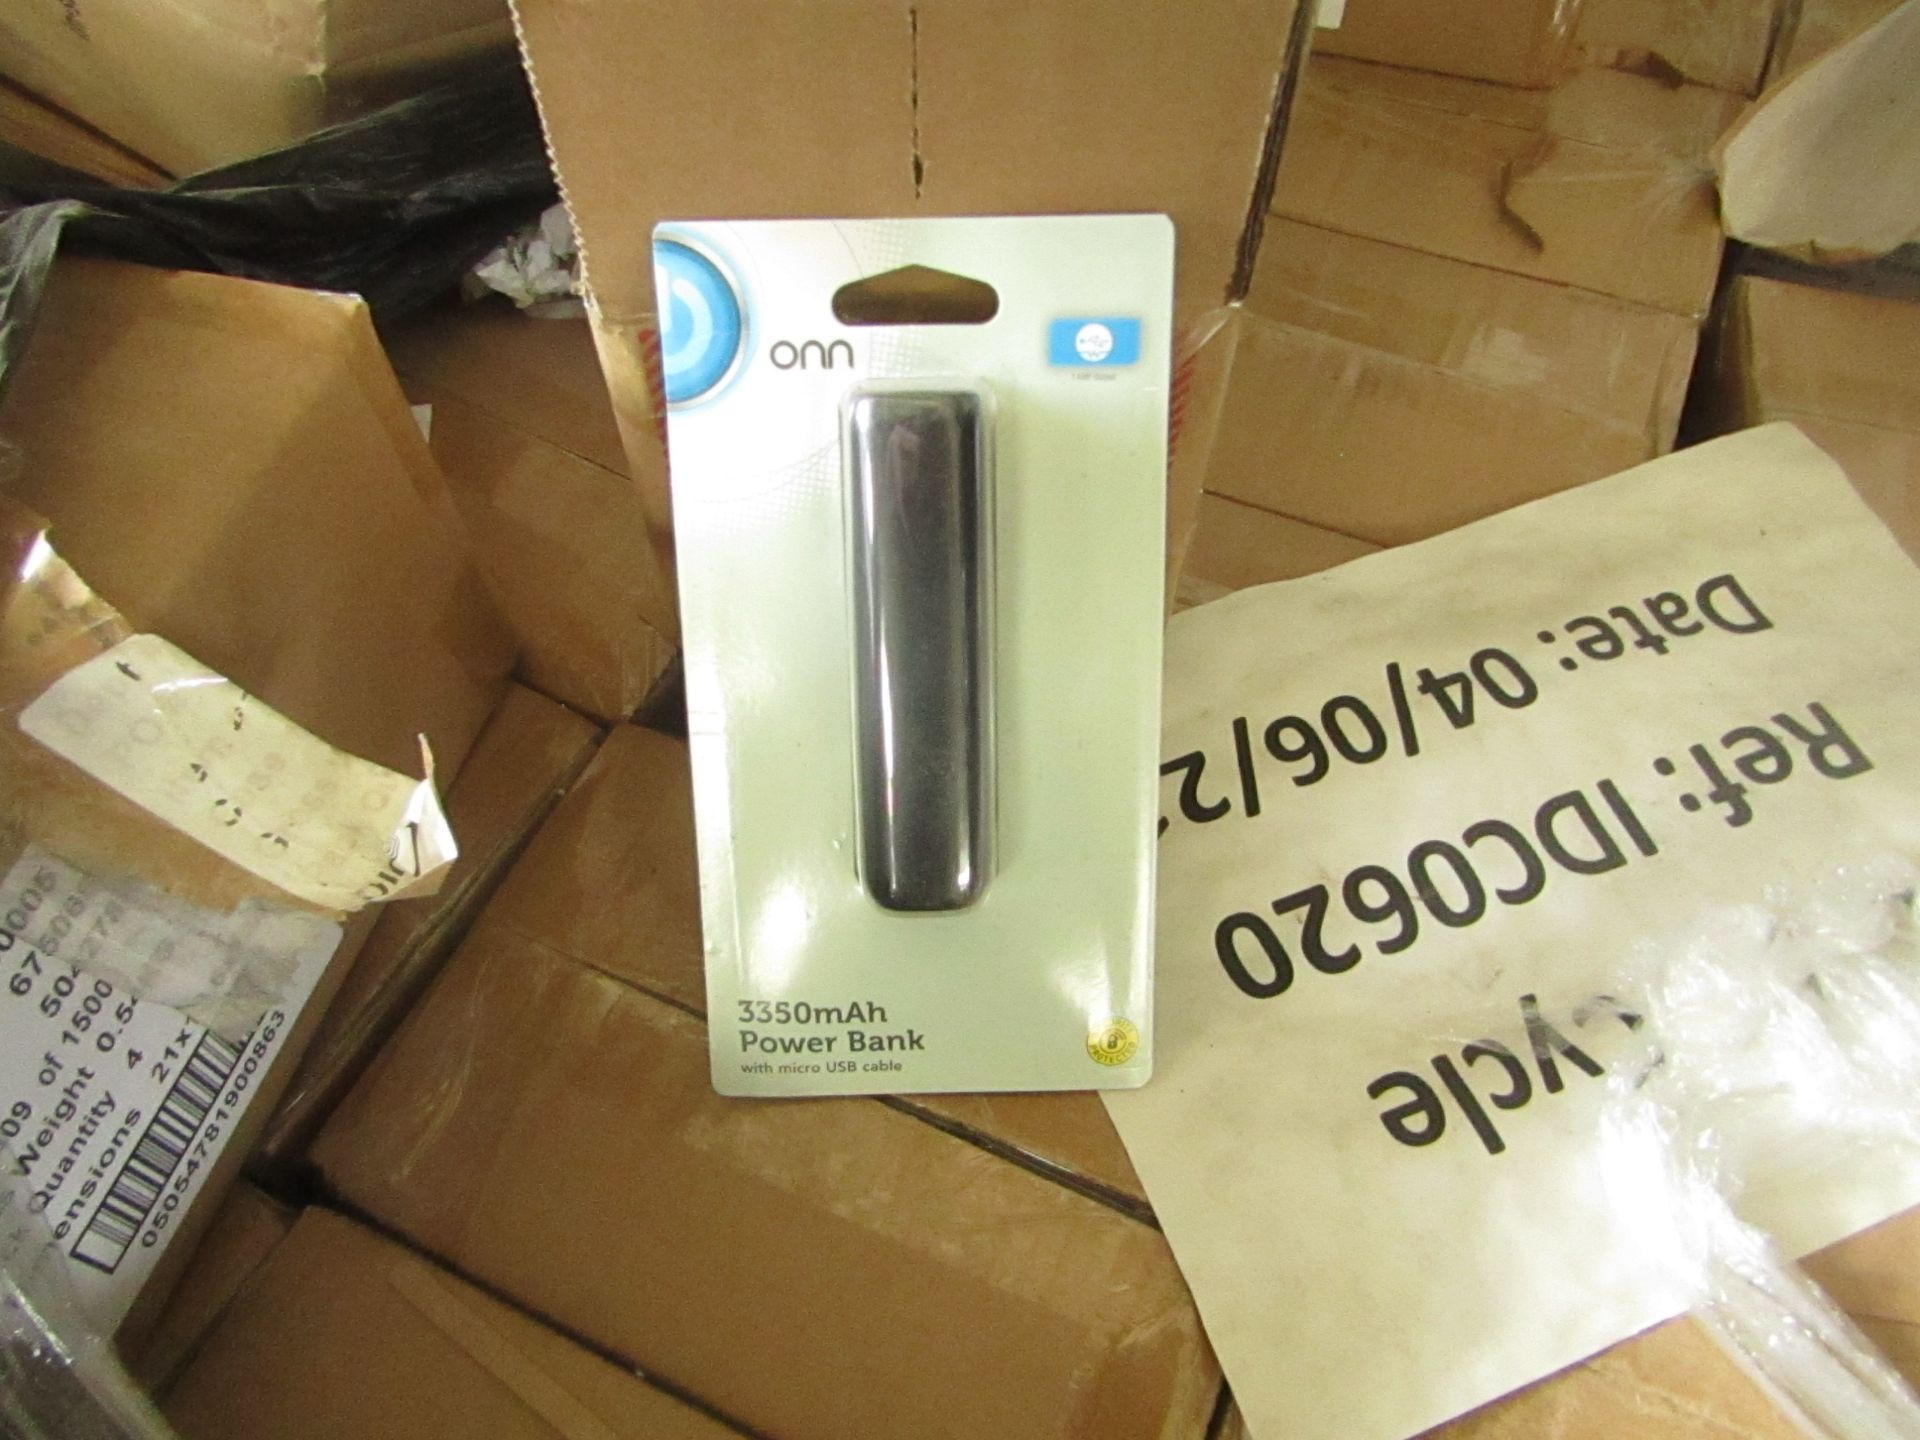 | 4x | ONN 3350MAH BOX OF 4 POWER BANK WITH MICRO USB CABLE | NEW & BOXED | NO ONLINE RESALE | SKU